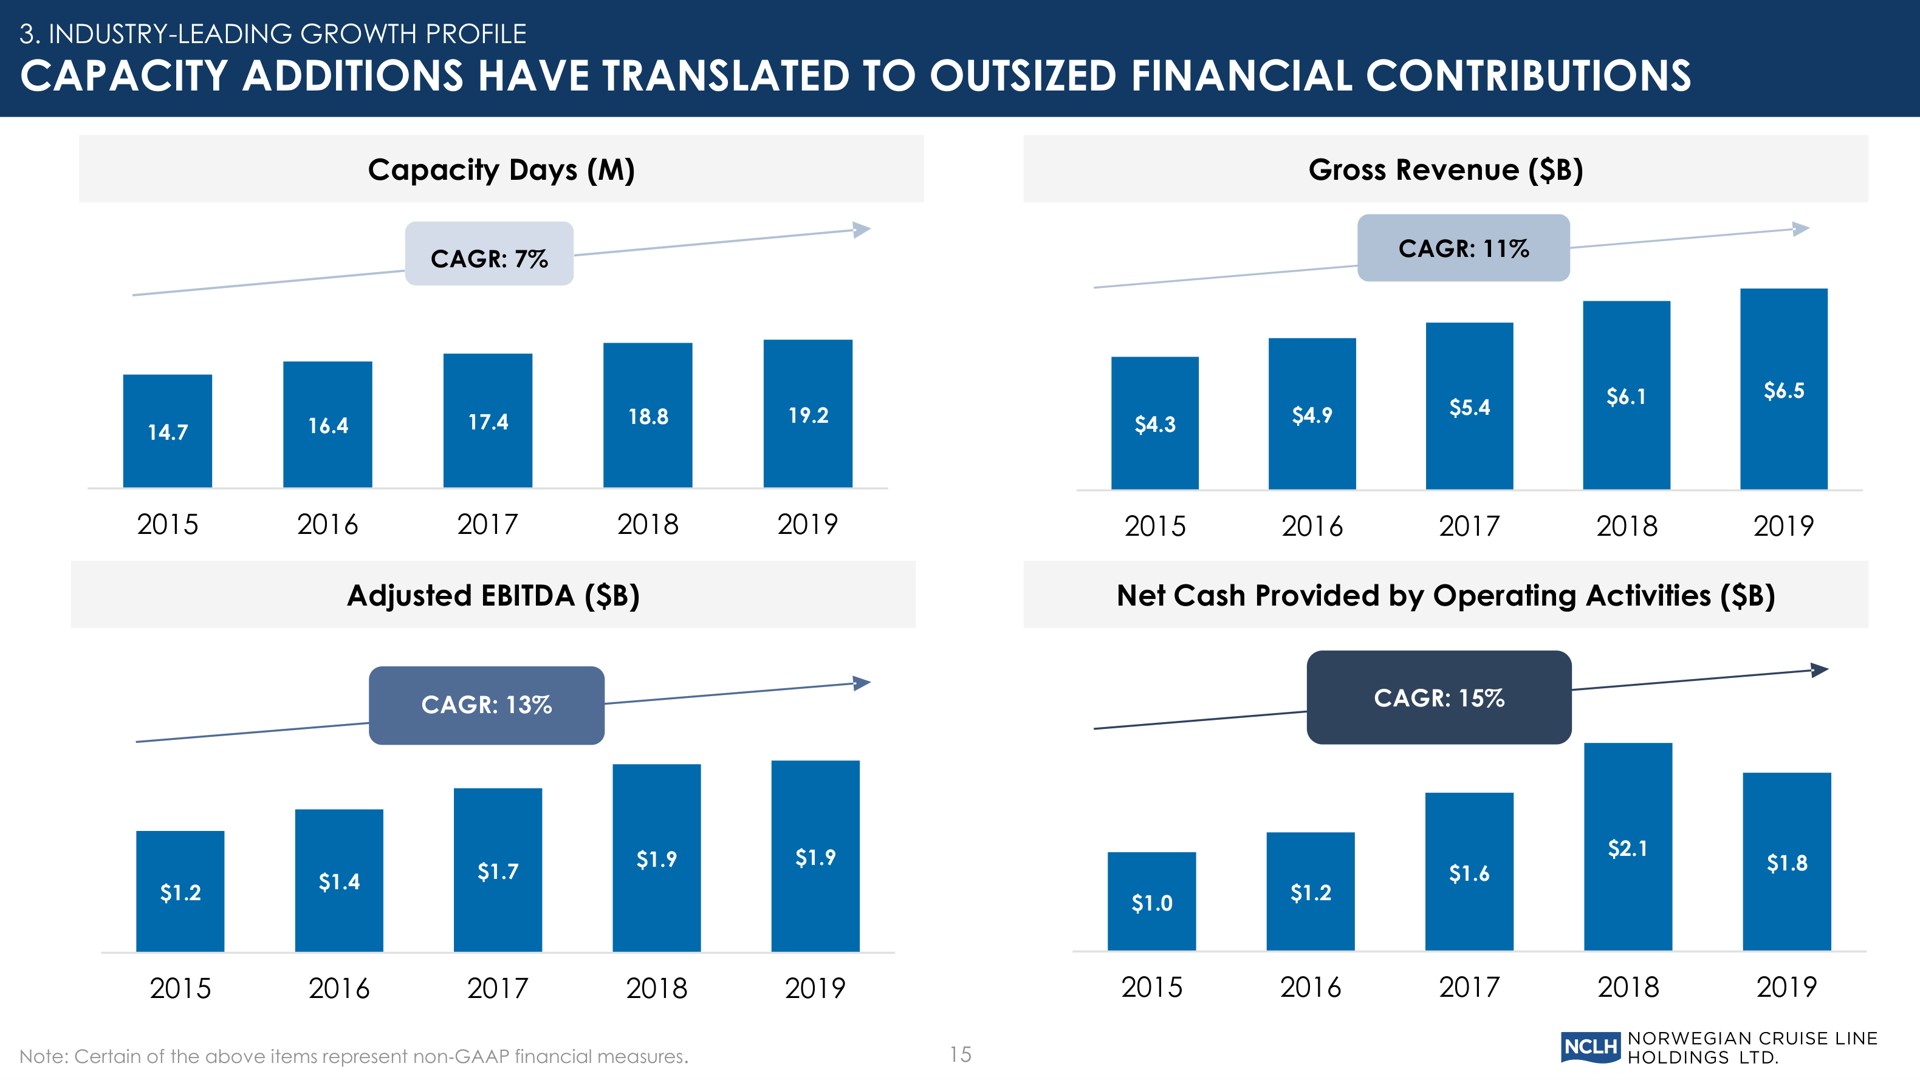 capacity additions have translated to outsized financial contributions | Norwegian Cruise Line